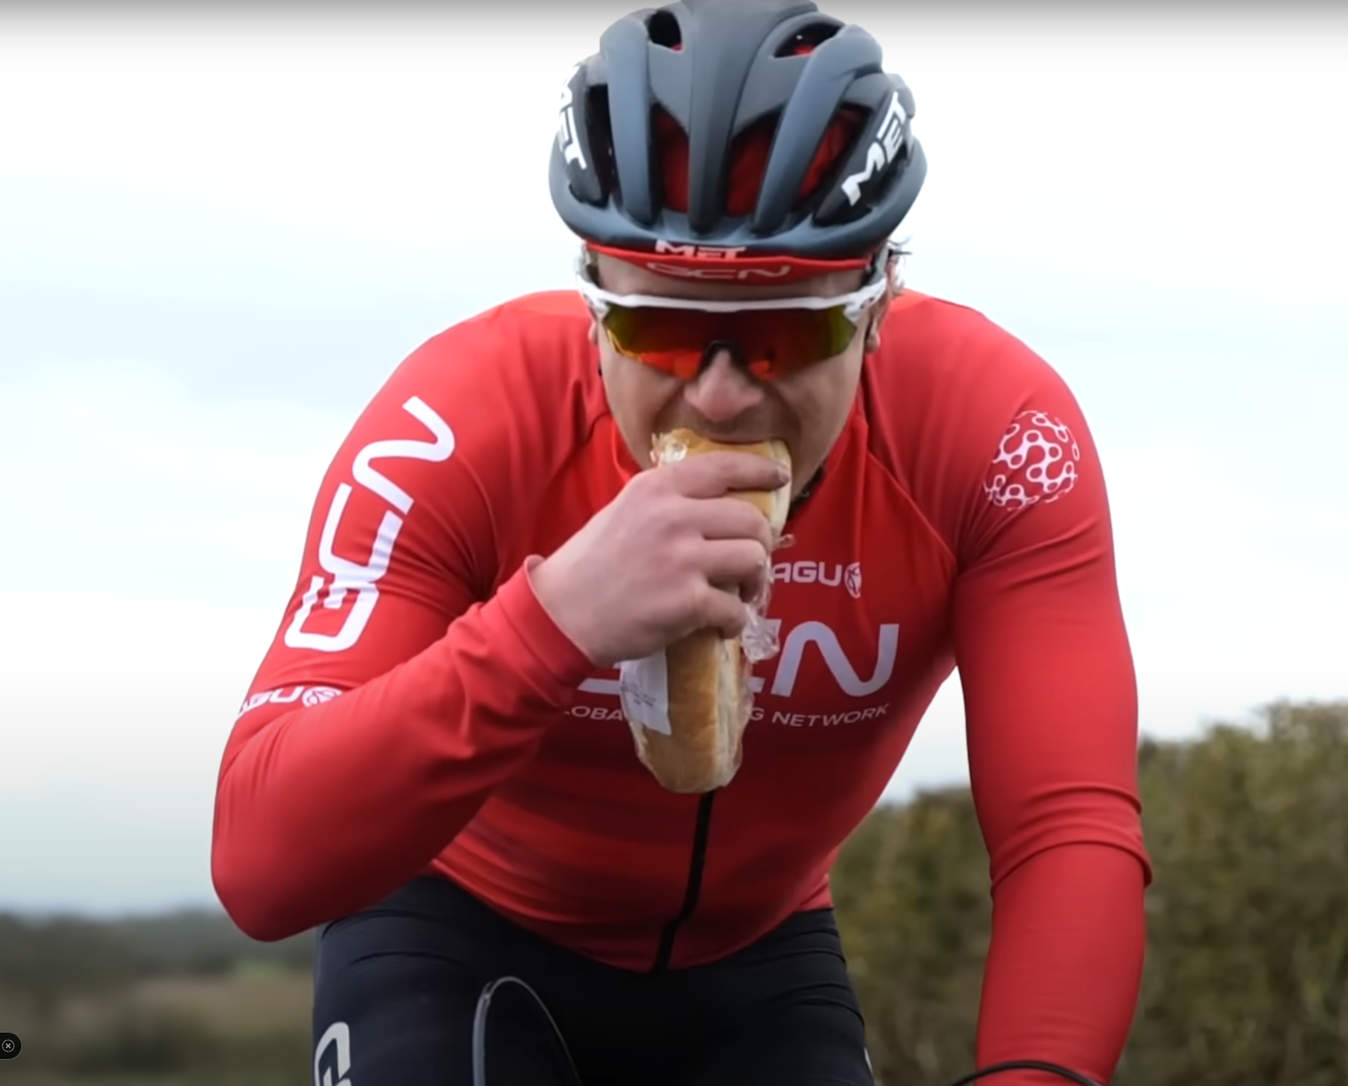 GCN's Hank not getting hit by a hunger knock